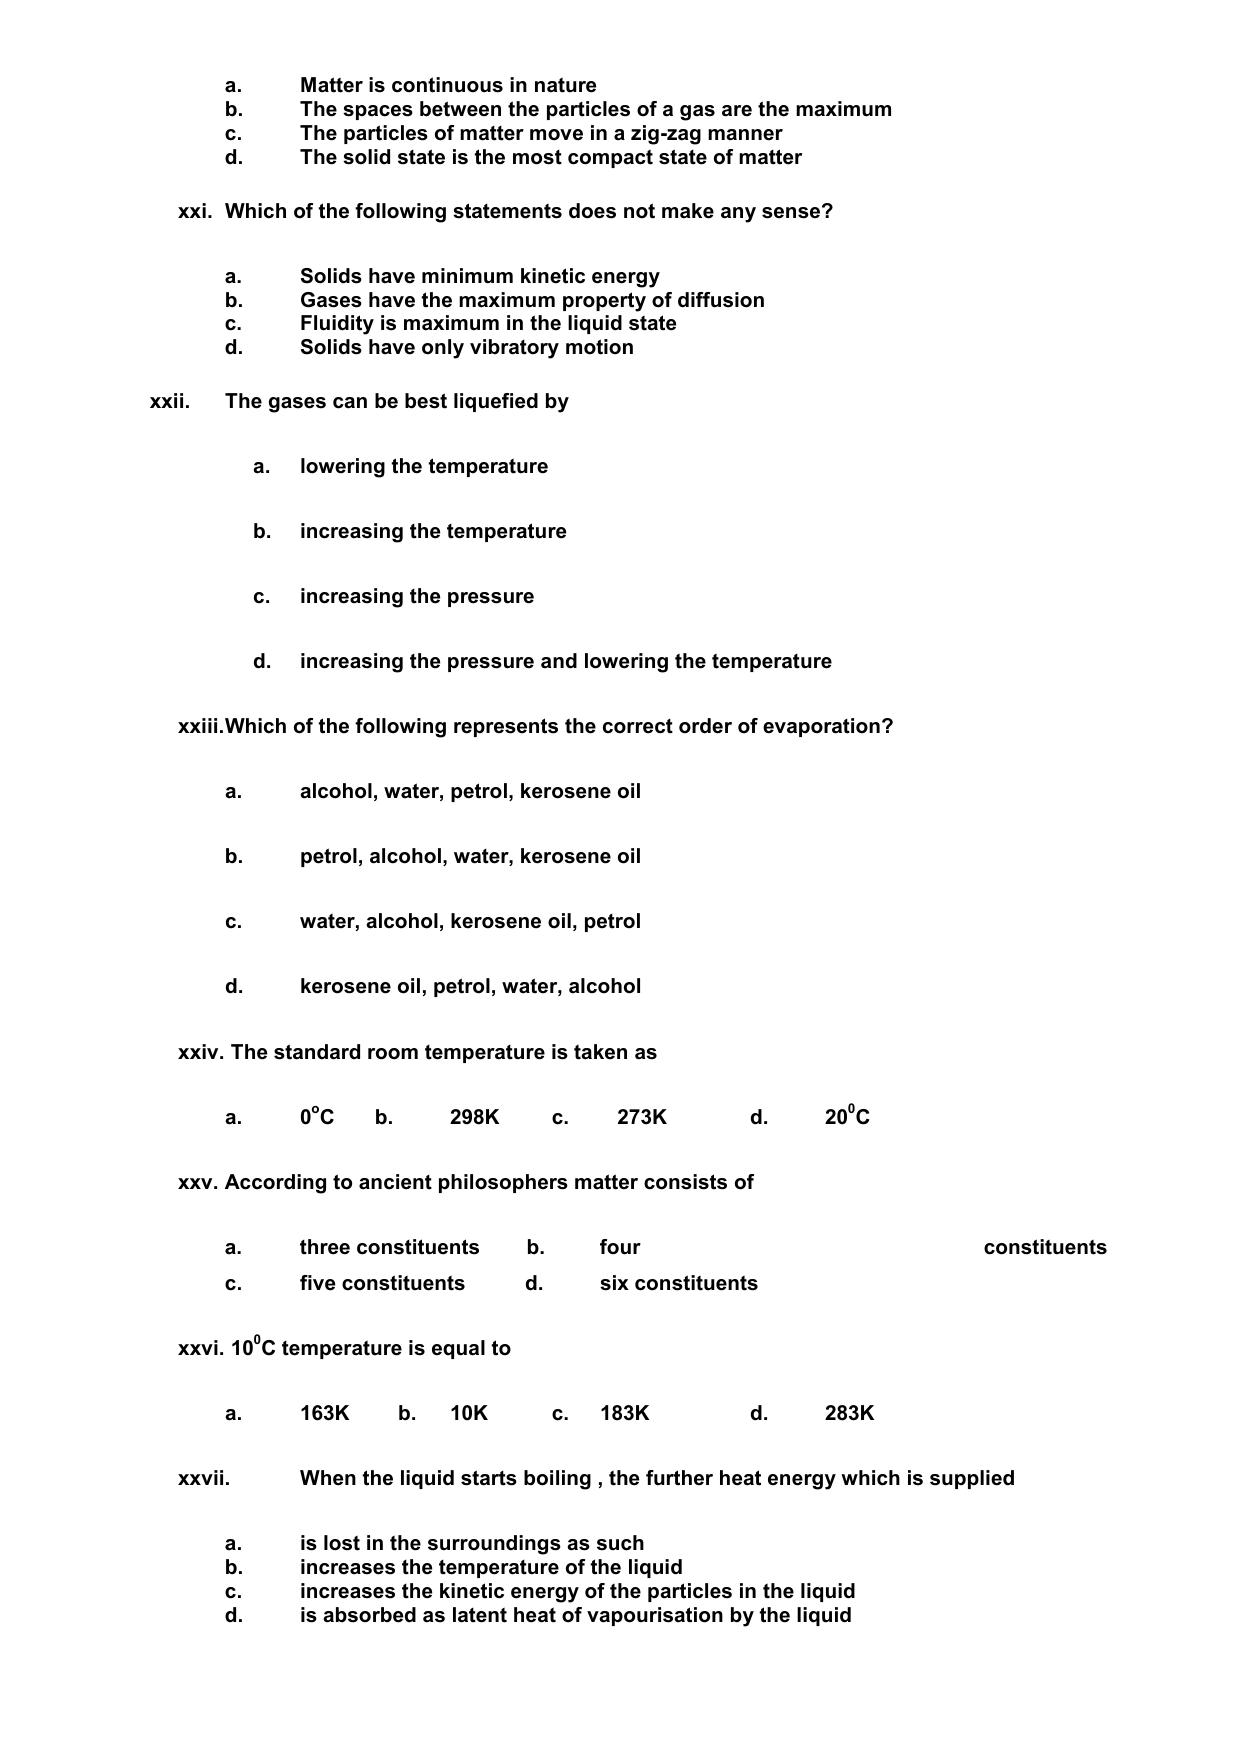 CBSE Worksheets for Class 9 Assignment 9 - Page 10